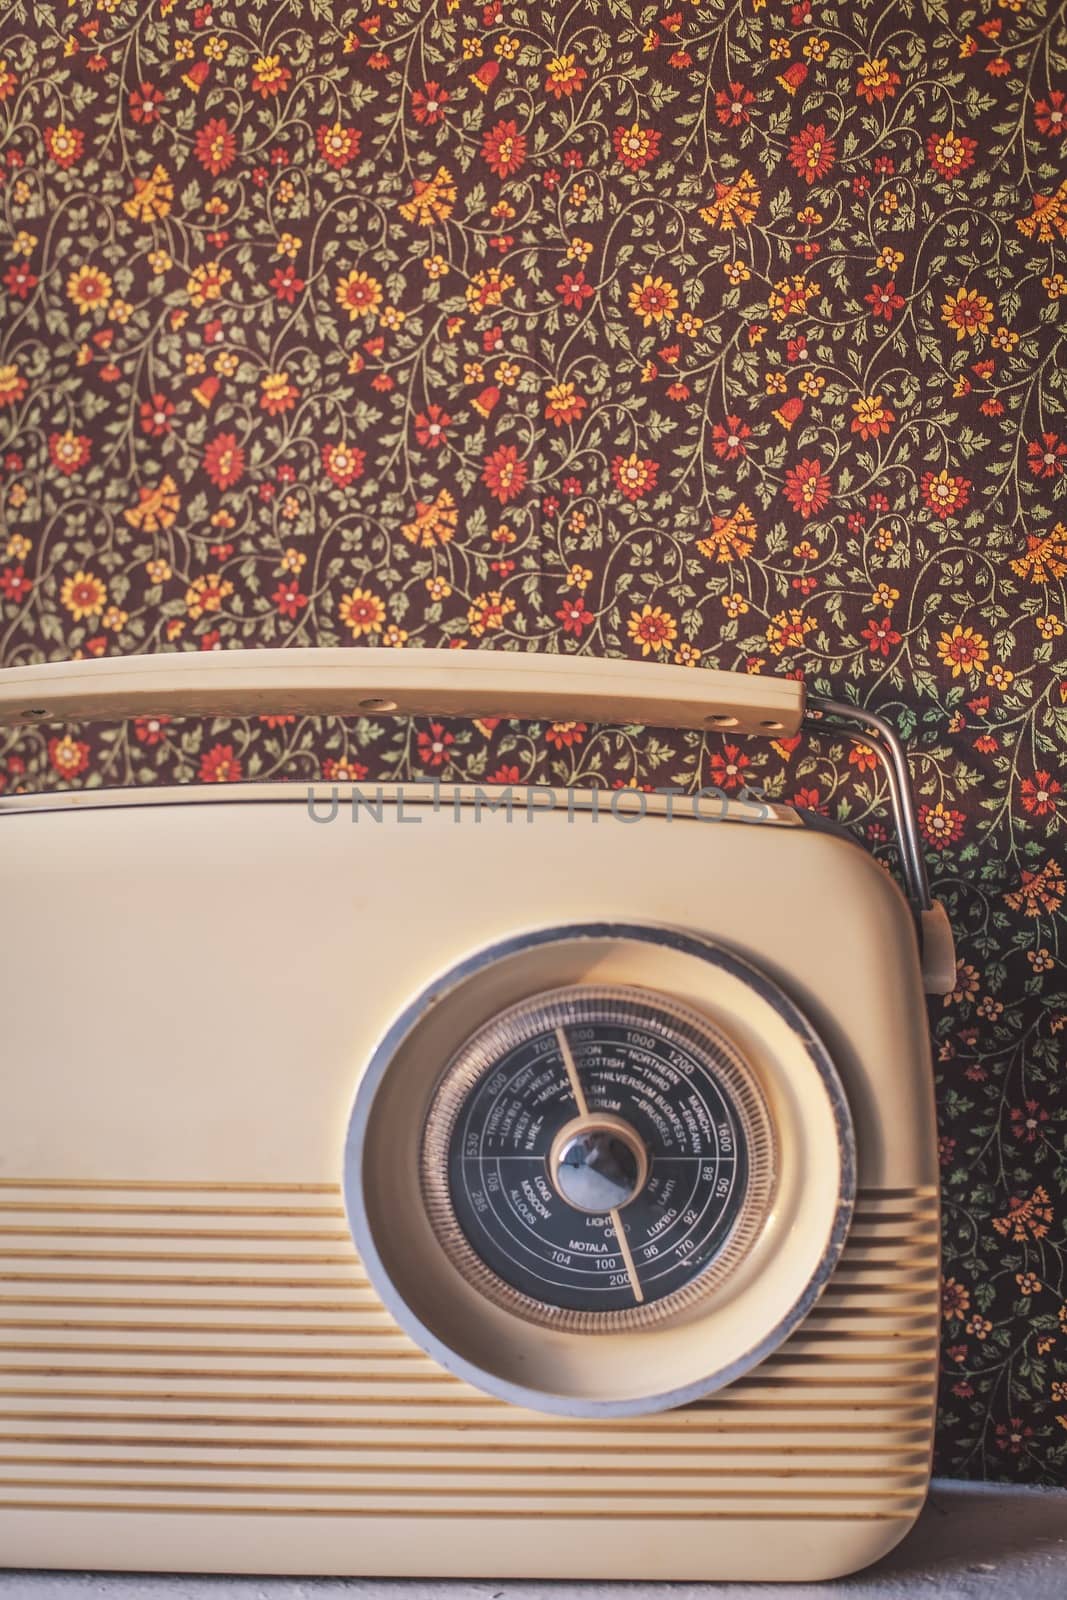 Vintage Radio with old-fashioned patterned wallpaper in the background